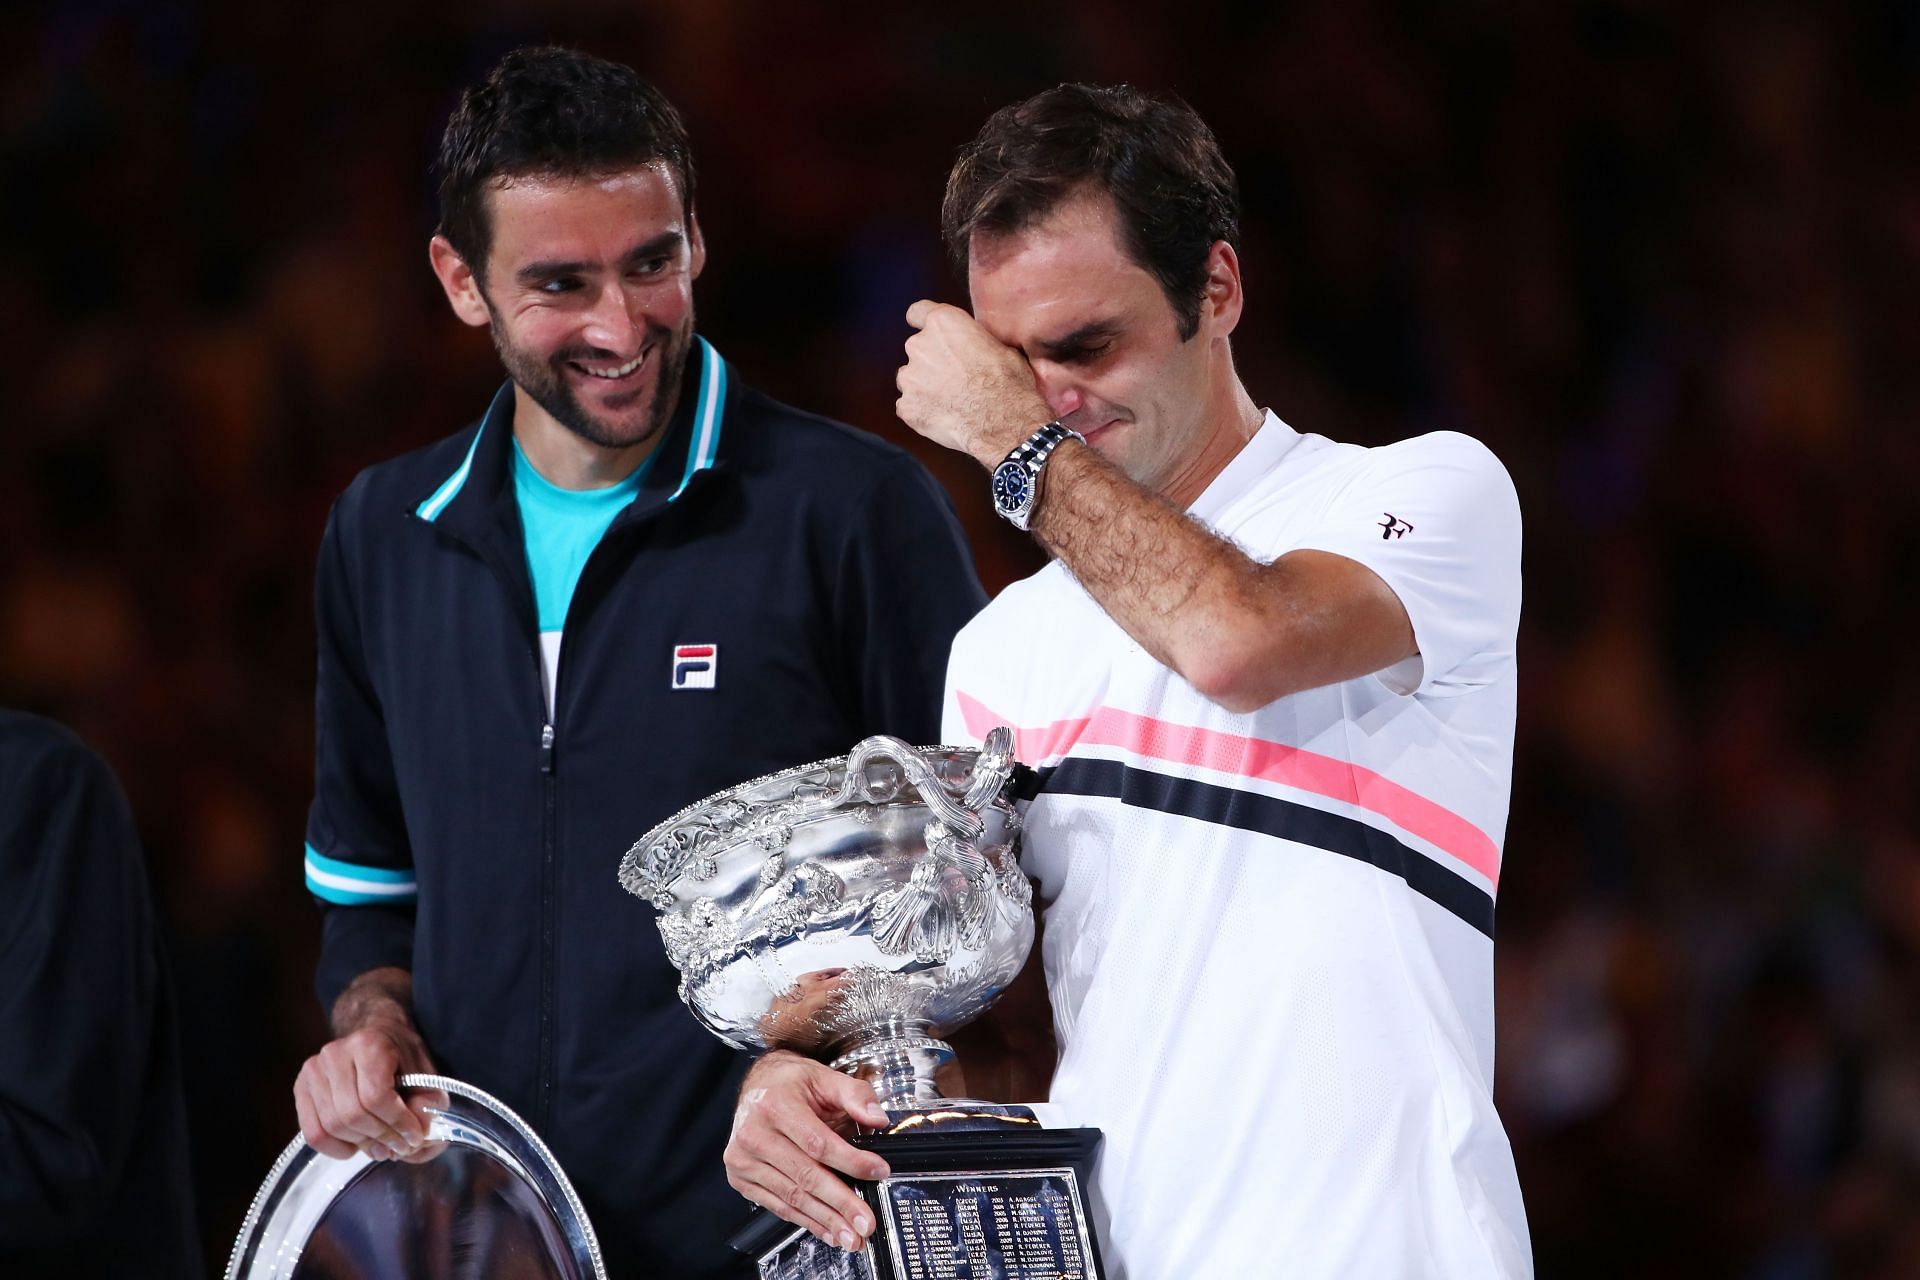 Marin Cilic and Roger Federer at the 2018 Australian Open